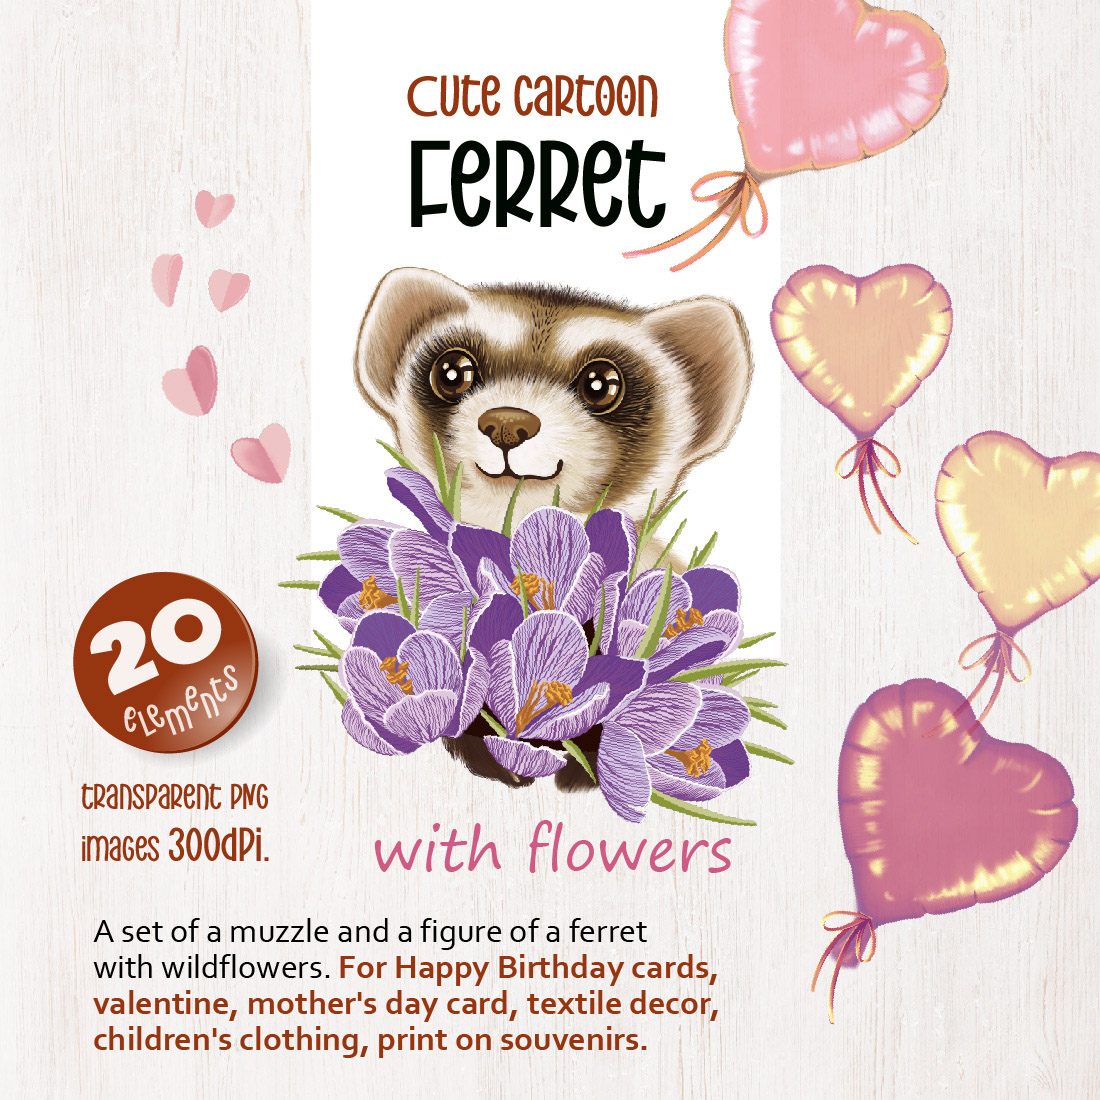 Cute Cartoon Ferret with Flowers previews.